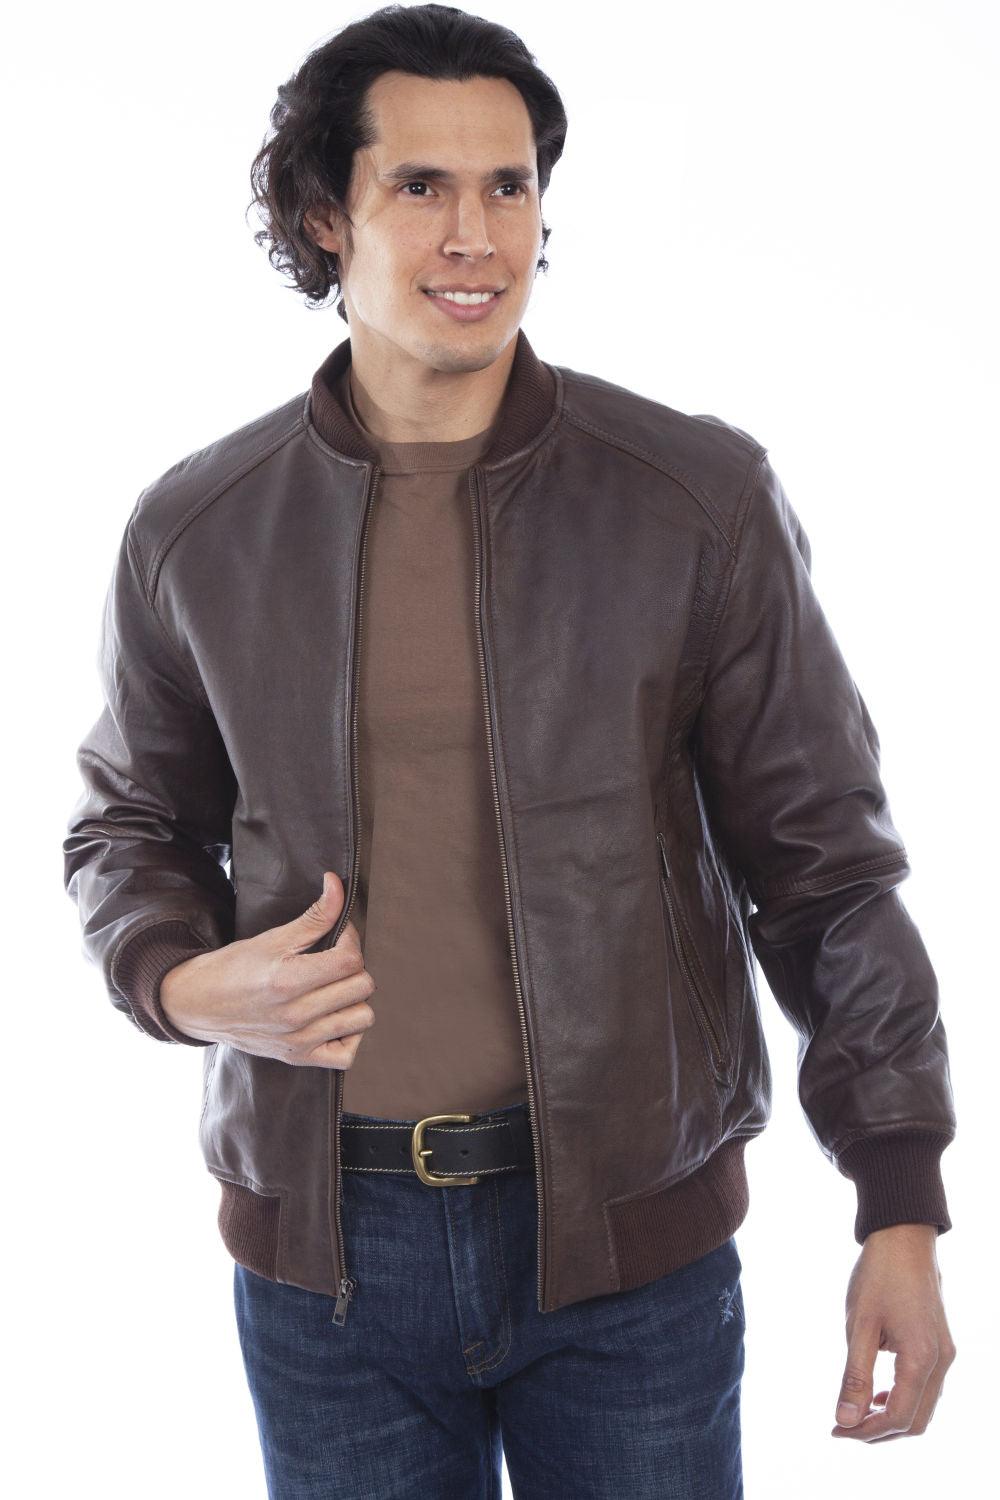 Scully Leather Brown 100% Leather Men's Jacket - Flyclothing LLC